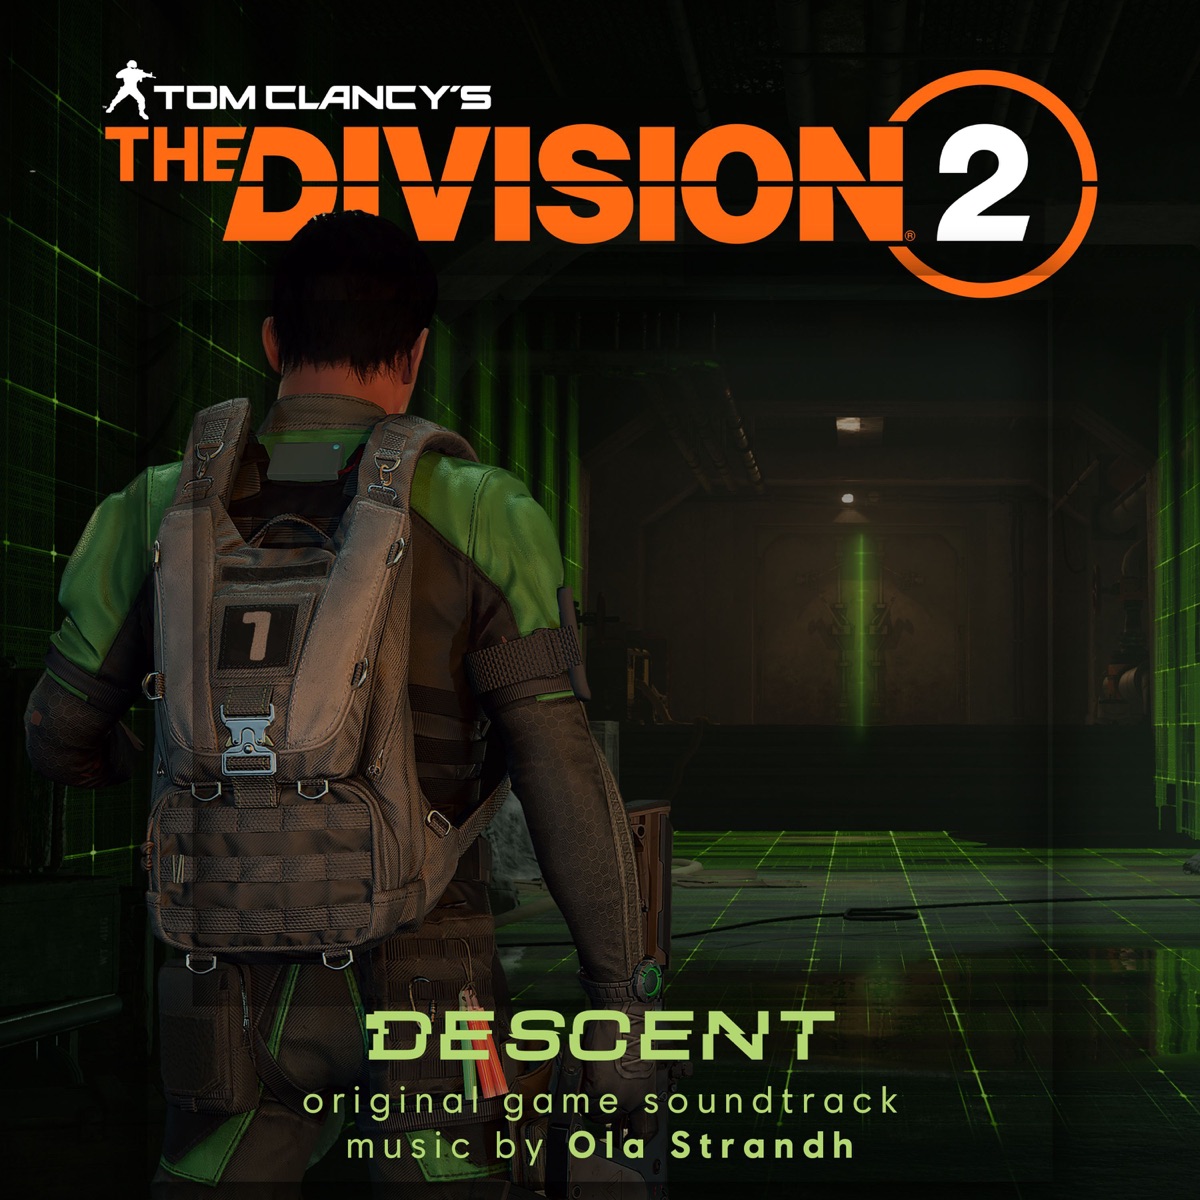 Tom Clancy's the Division 2 (Original Game Soundtrack) by Ola Strandh on  Apple Music